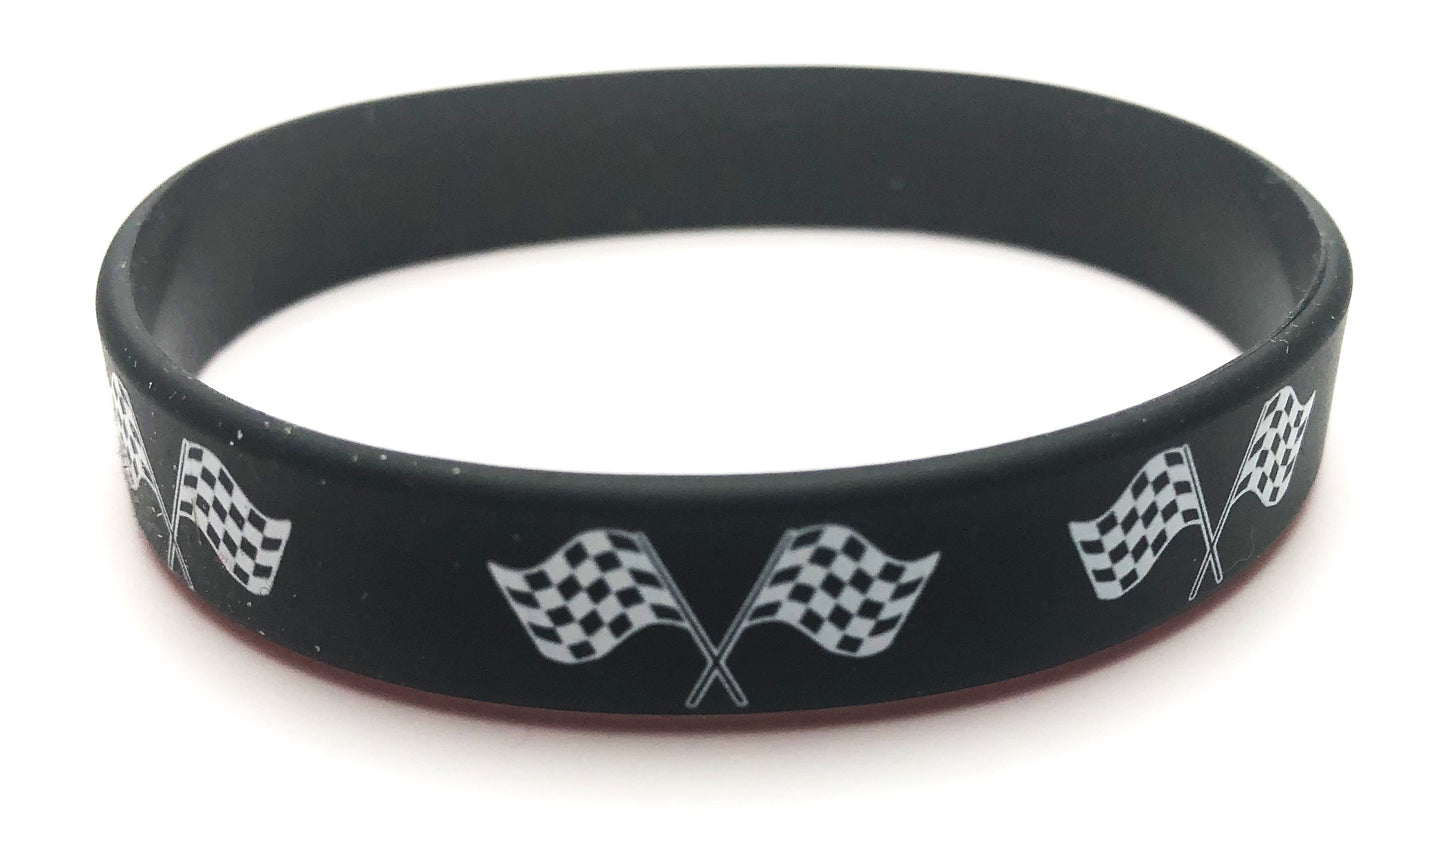 Silicone Wristband - Crossed Flags